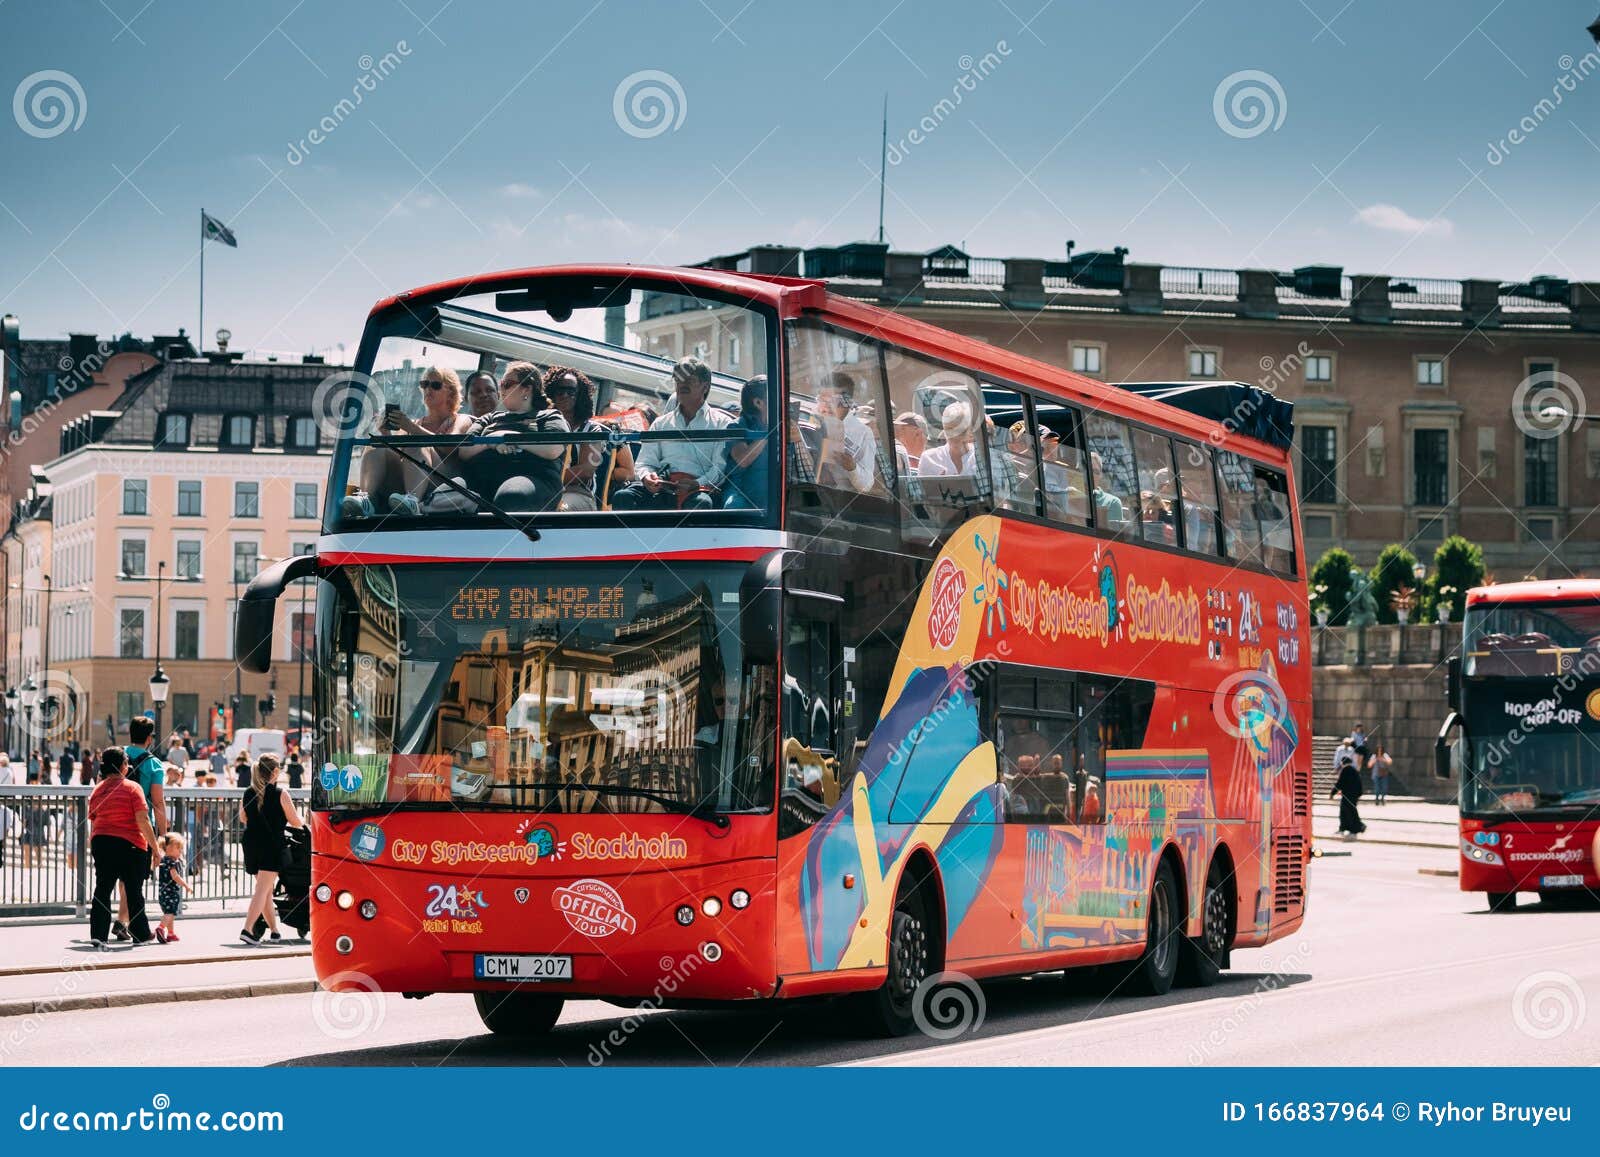 Stockholm, Sweden. Tourists People Ride in Red Hop on Off Touristic Bus for Sightseeing Down the Near Editorial Stock Image - Image of landmark, 166837964